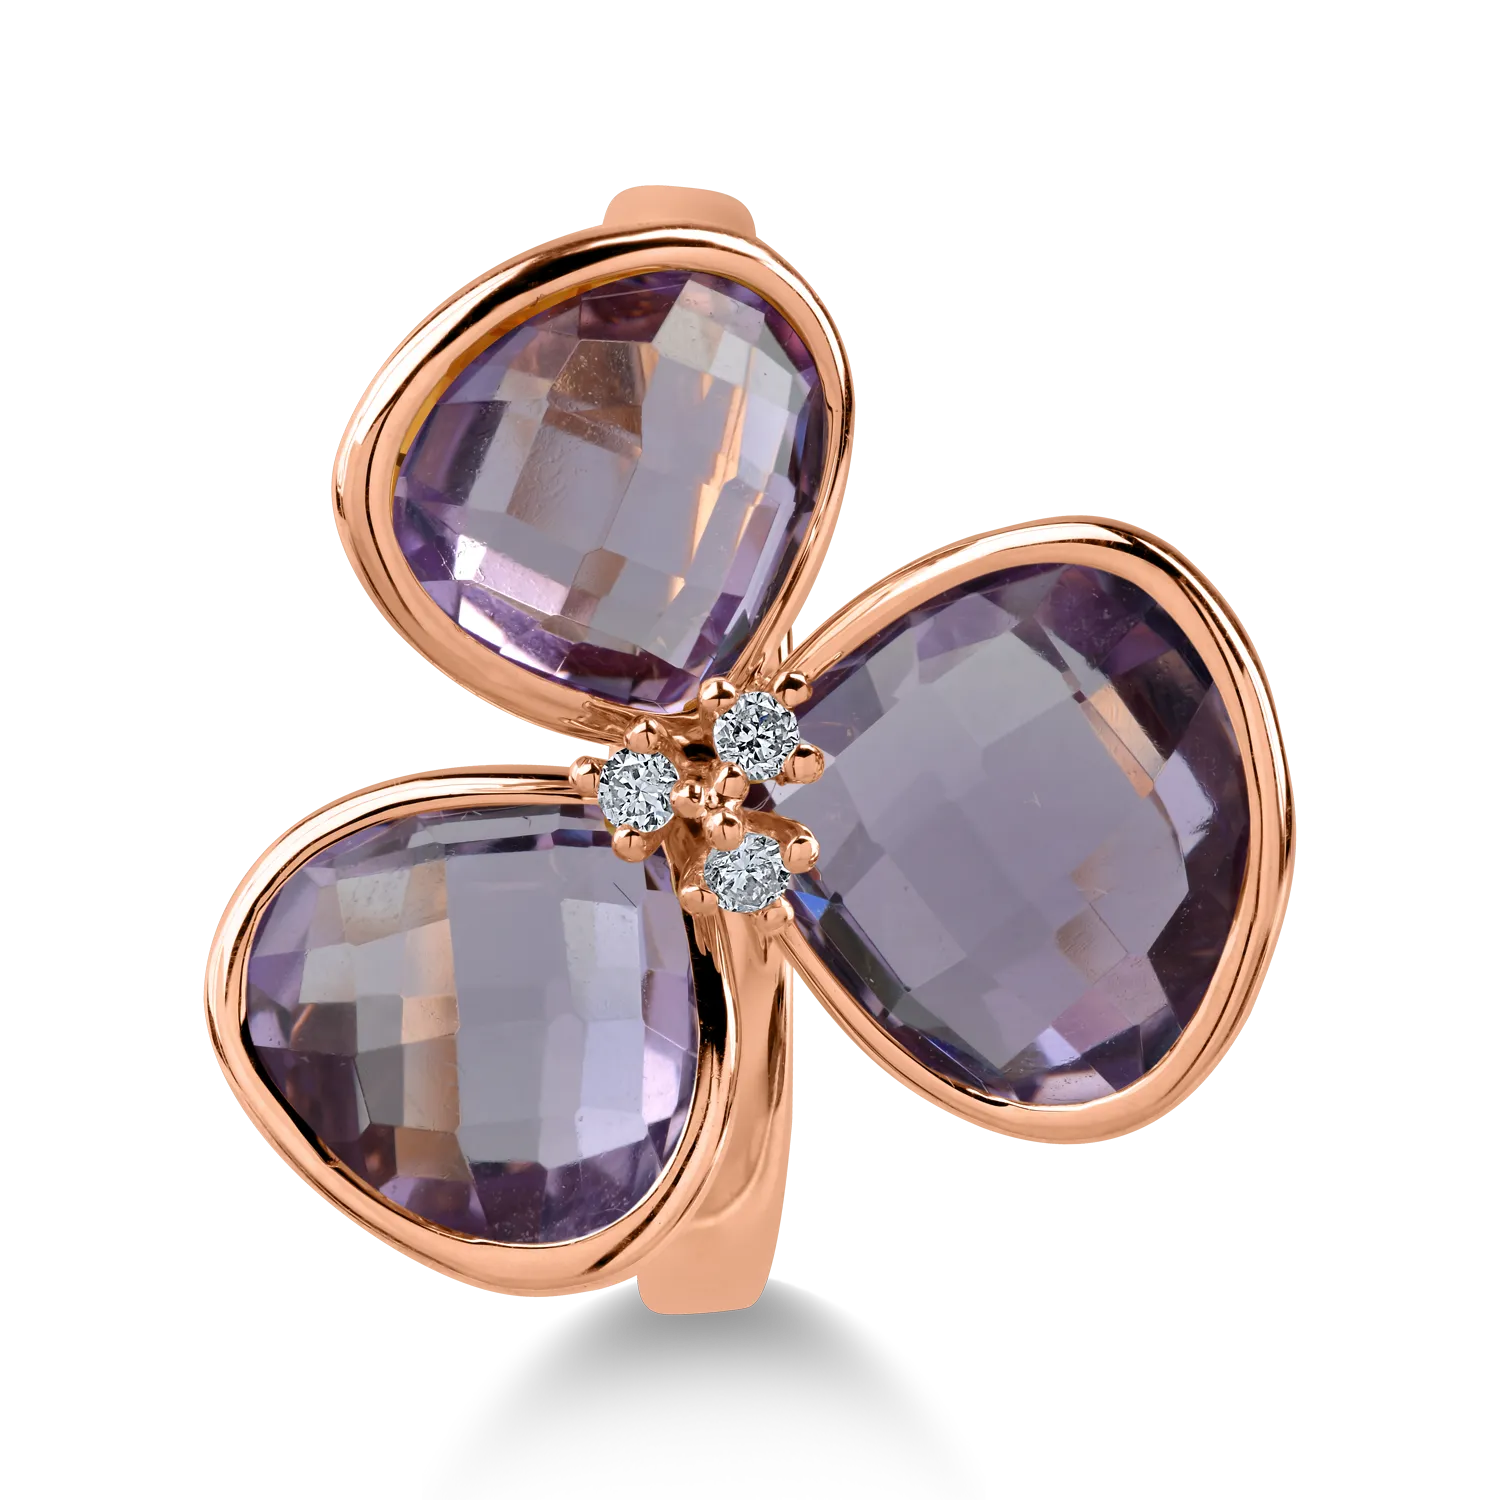 Rose gold flower ring with 6.6ct pink amethysts and 0.05ct diamonds